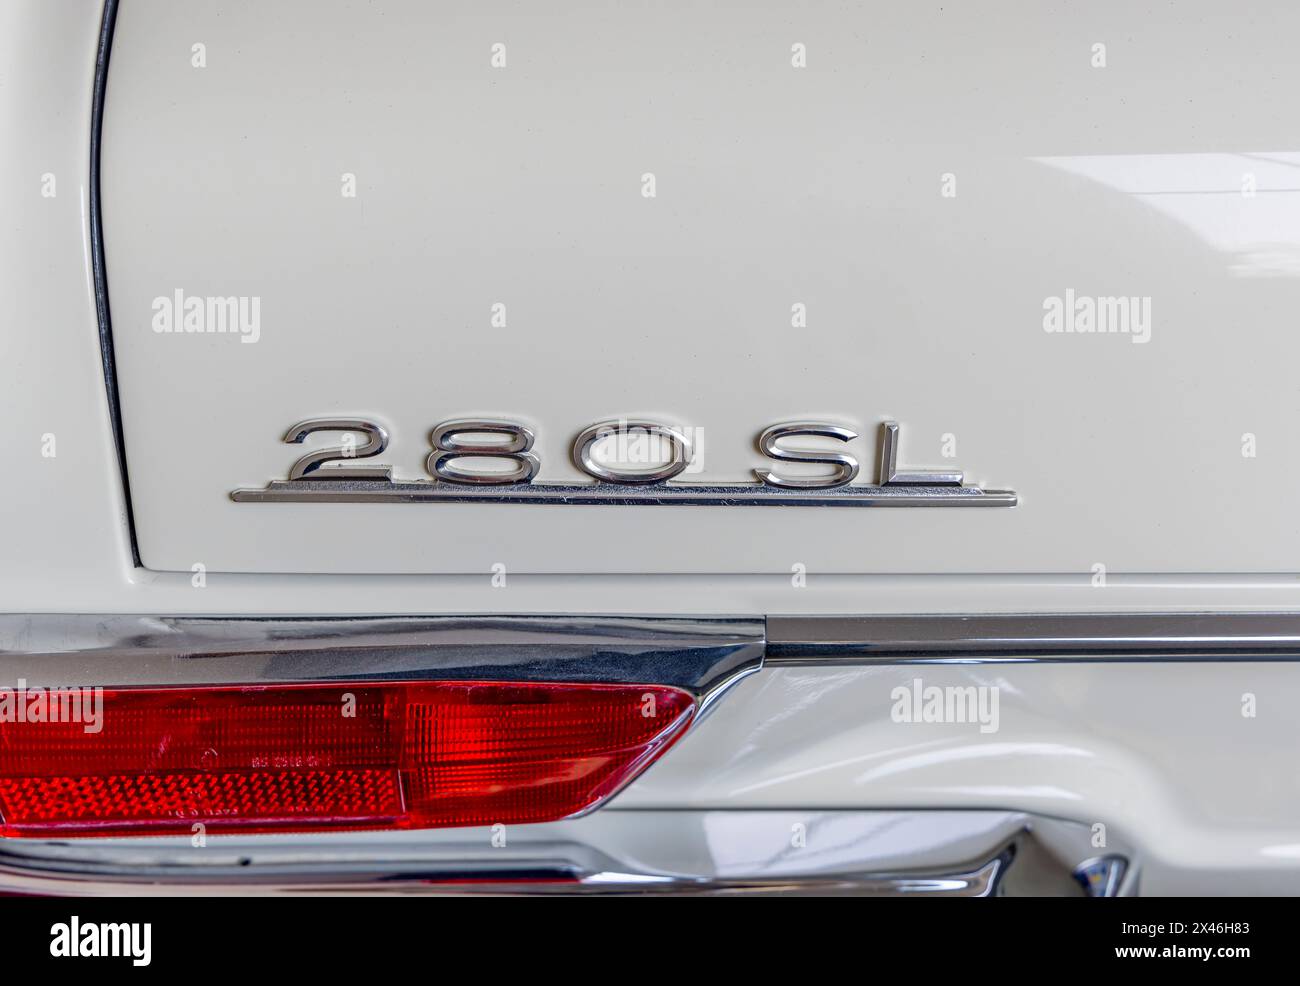 detail image of a 280 sl mercedes moniker on the trunk Stock Photo